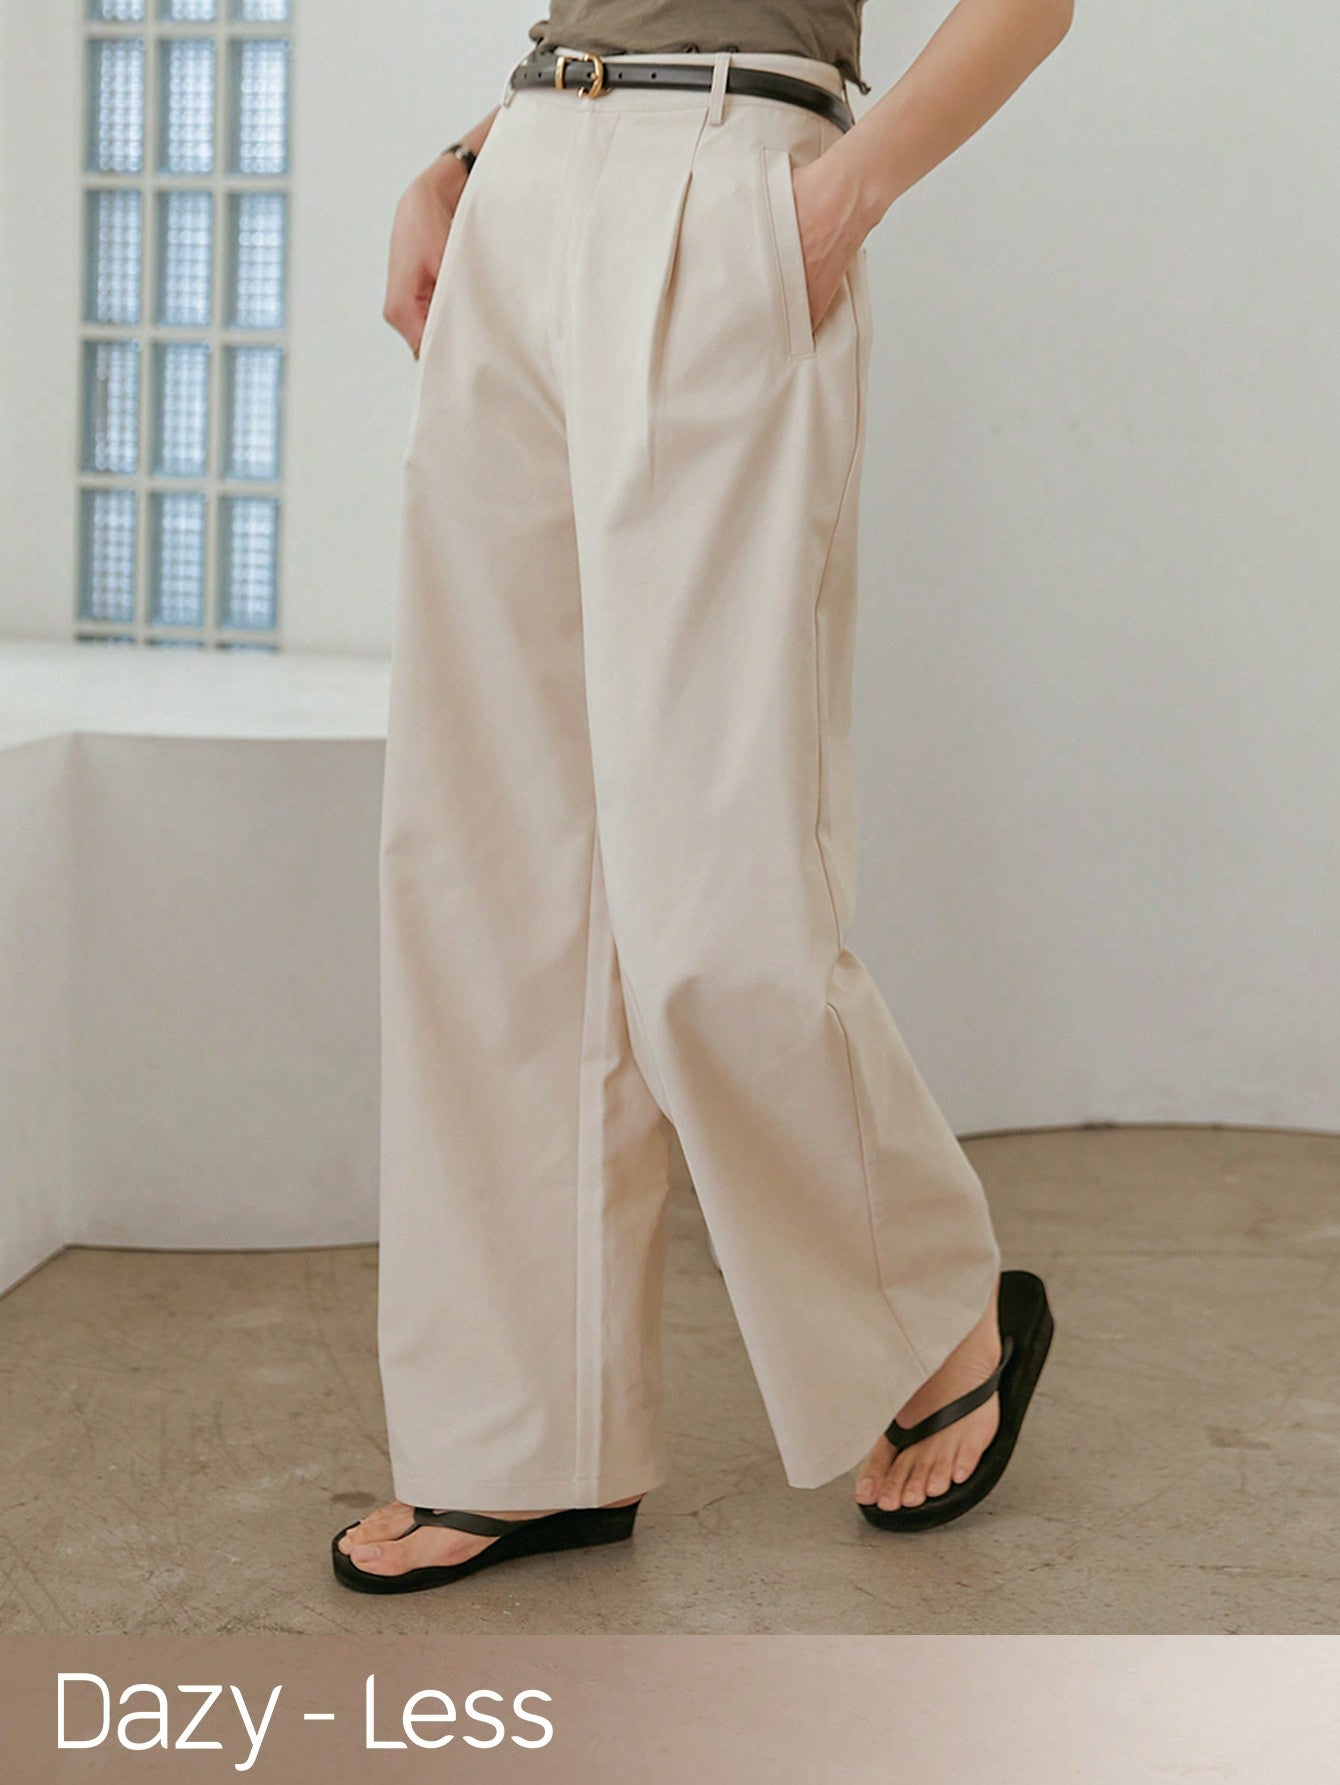 Women's Solid Color Pleated And Loose Suit Trousers